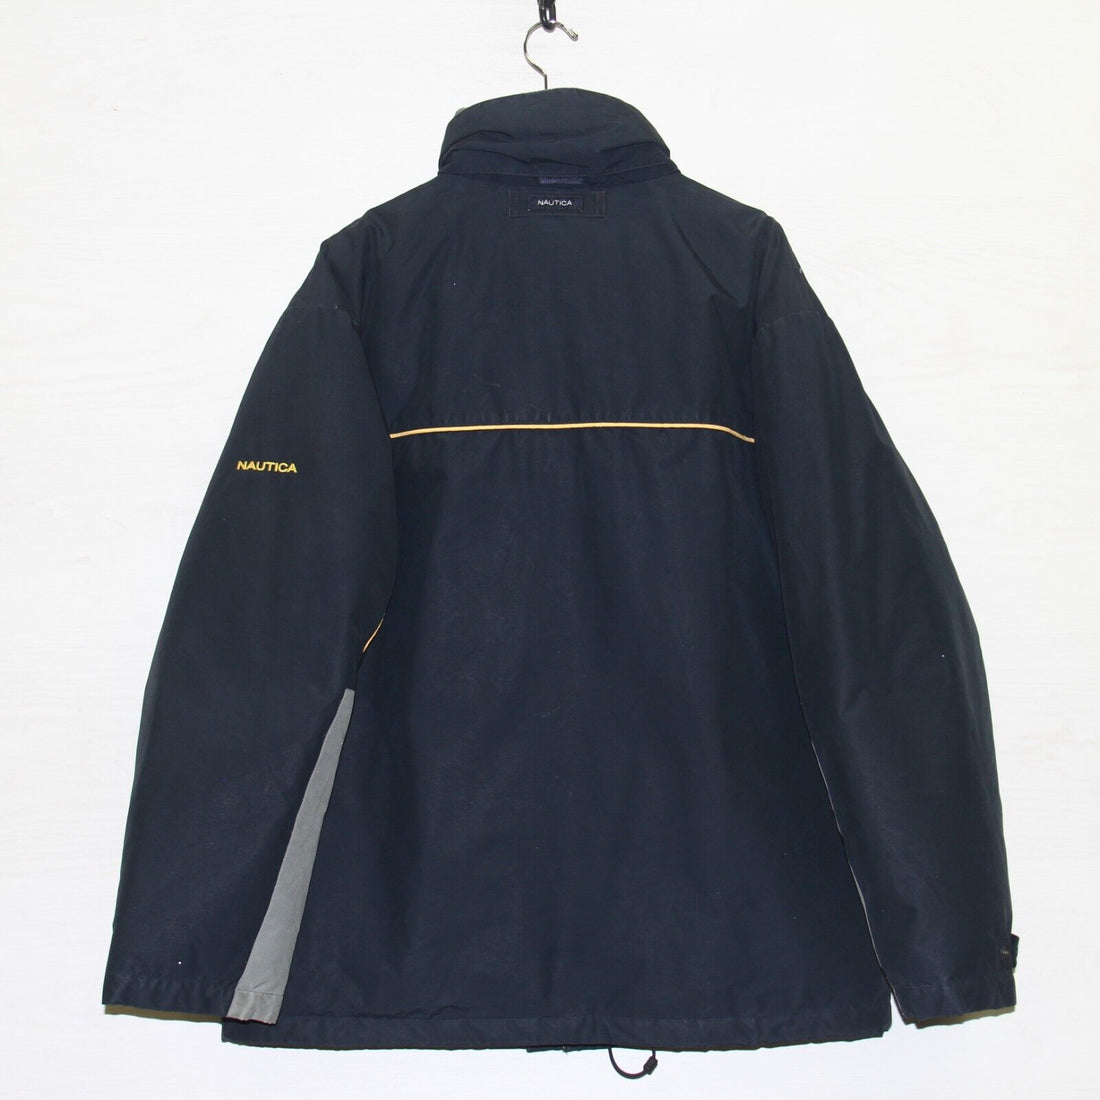 Vintage Nautica Puffer Parka Jacket Size XL Tall Navy Blue Down Insulated